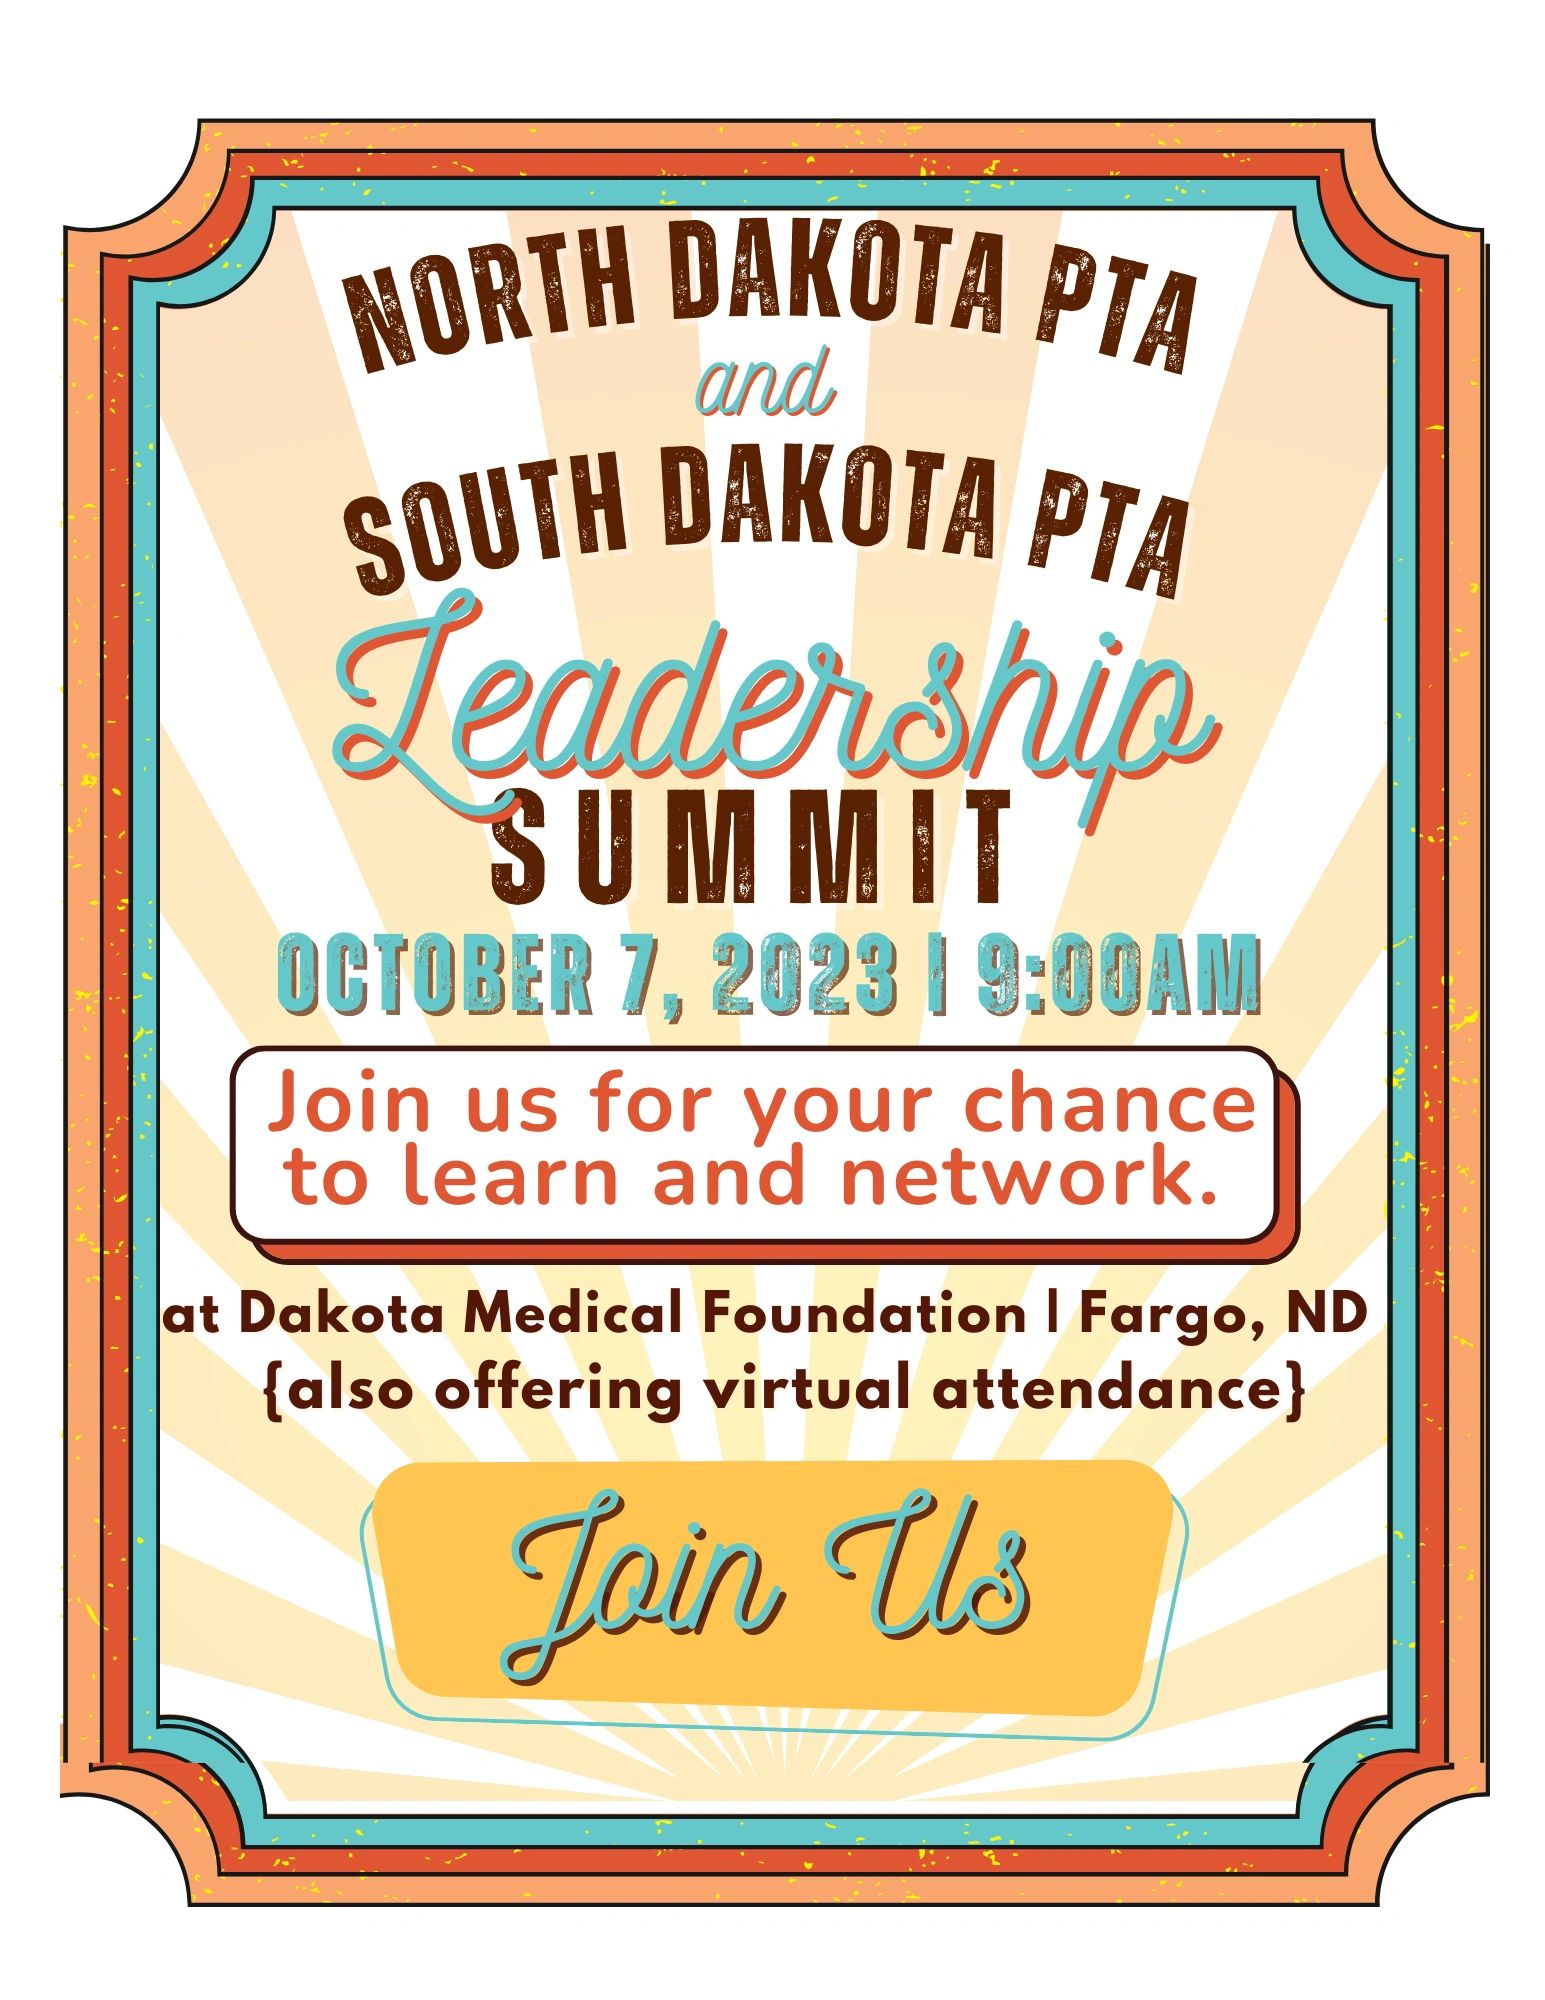 Join us for your chance to learn and network! Register to join us virtually!